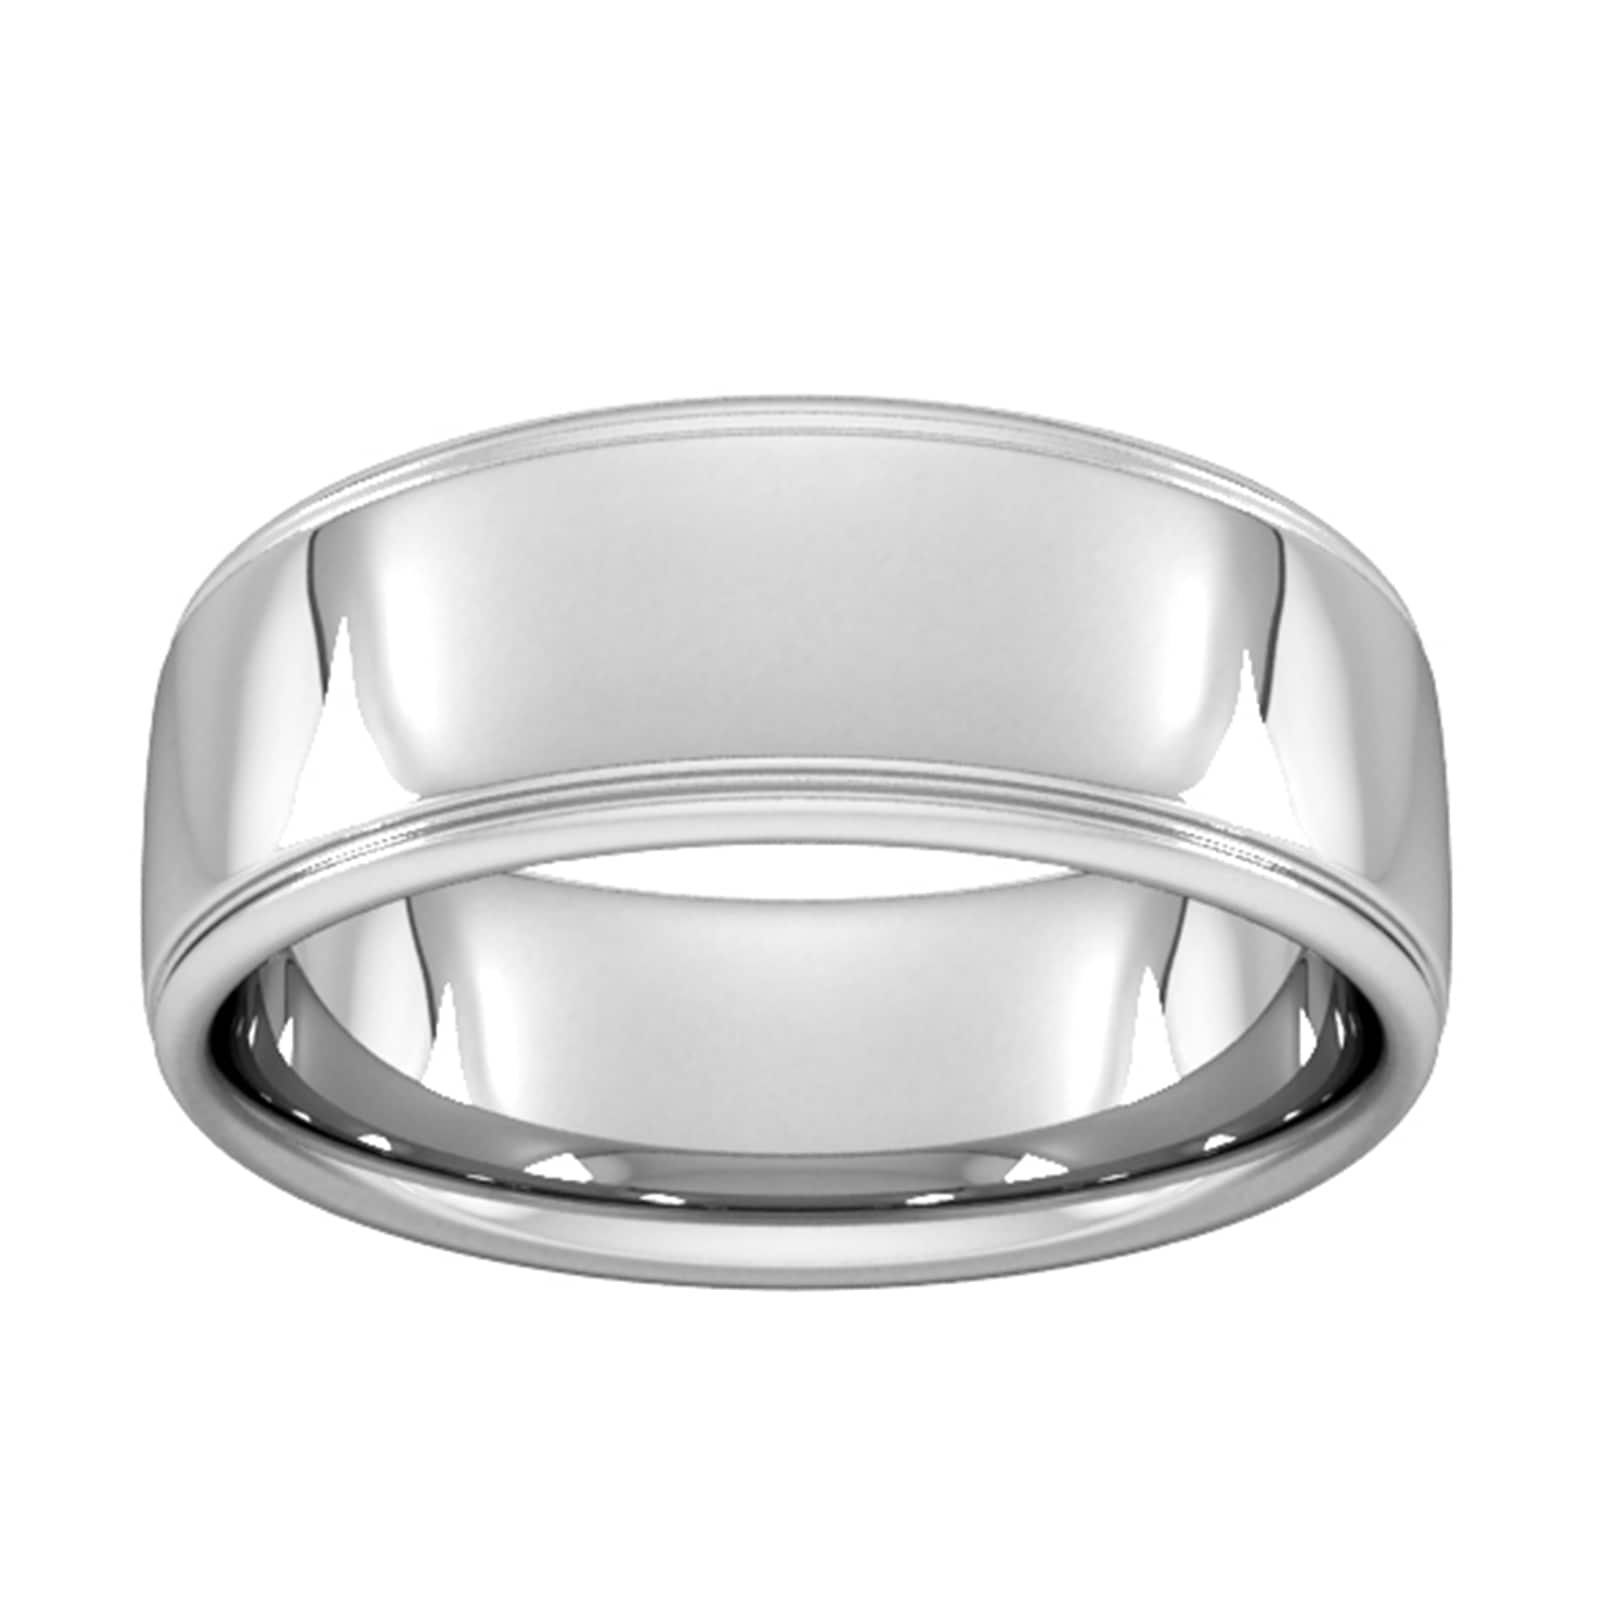 8mm Slight Court Heavy Polished Finish With Grooves Wedding Ring In 9 Carat White Gold - Ring Size H